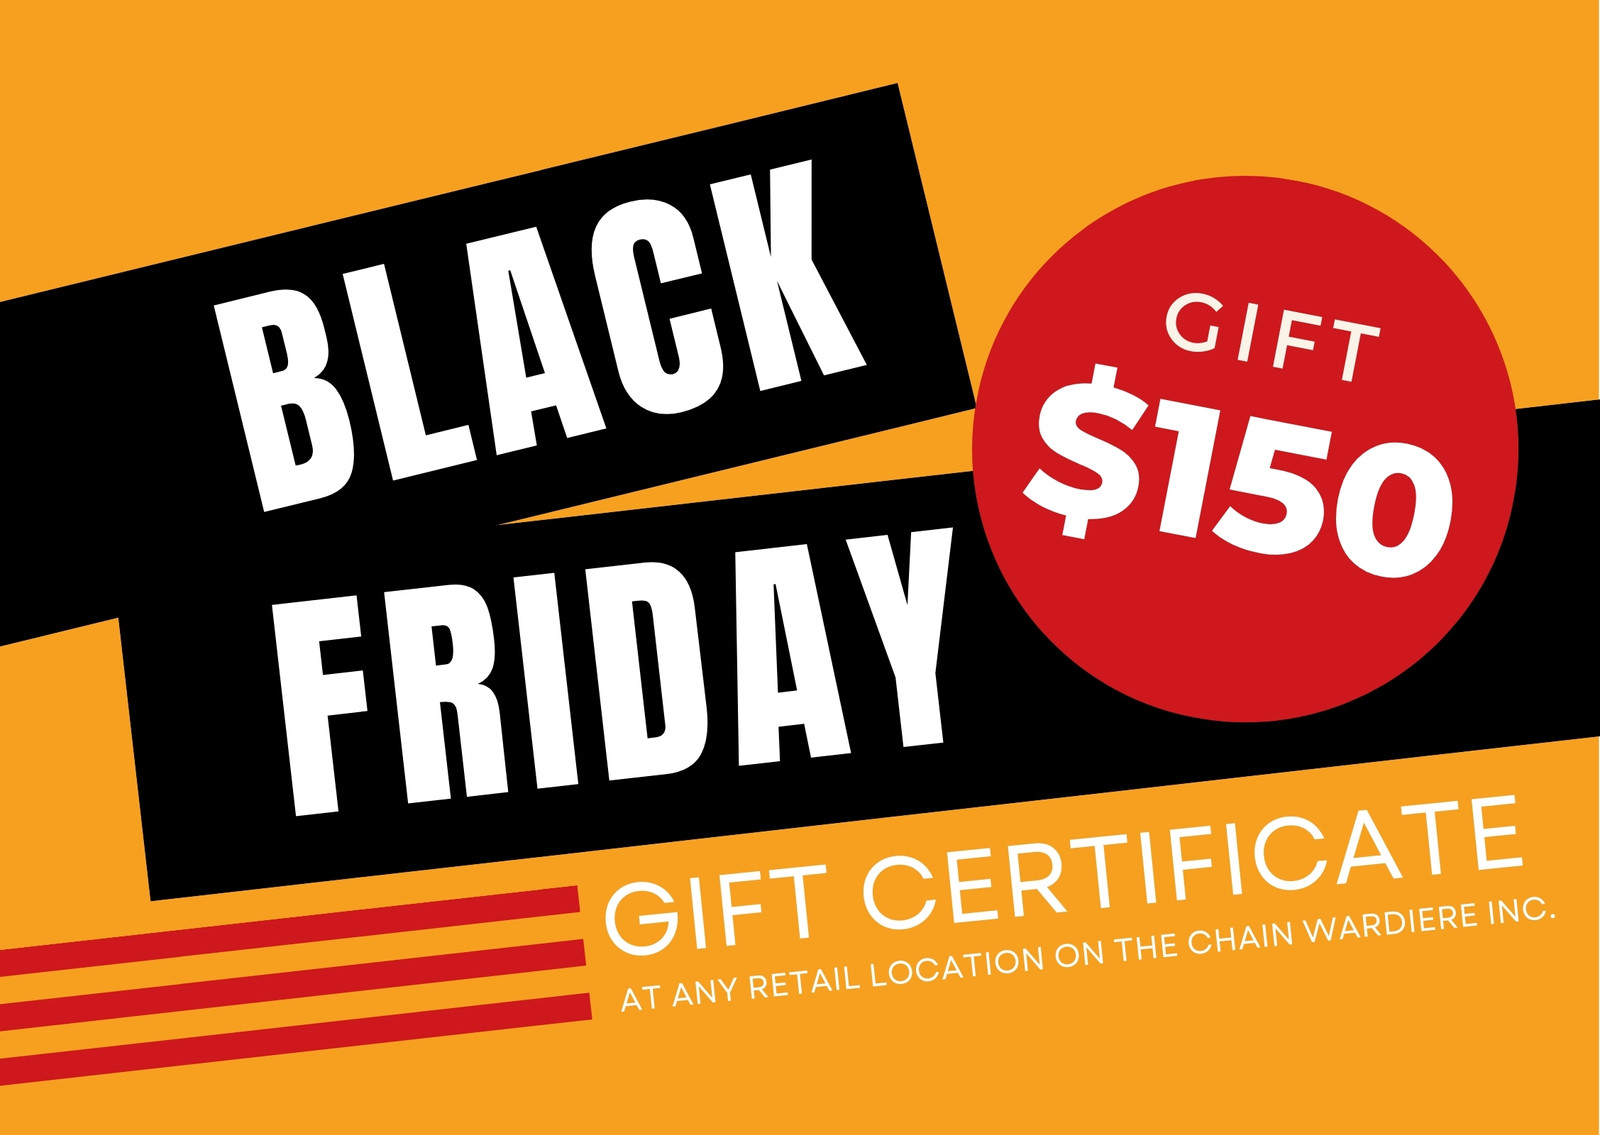 Our famous Black Friday gift card... - Badger Sports Park | Facebook